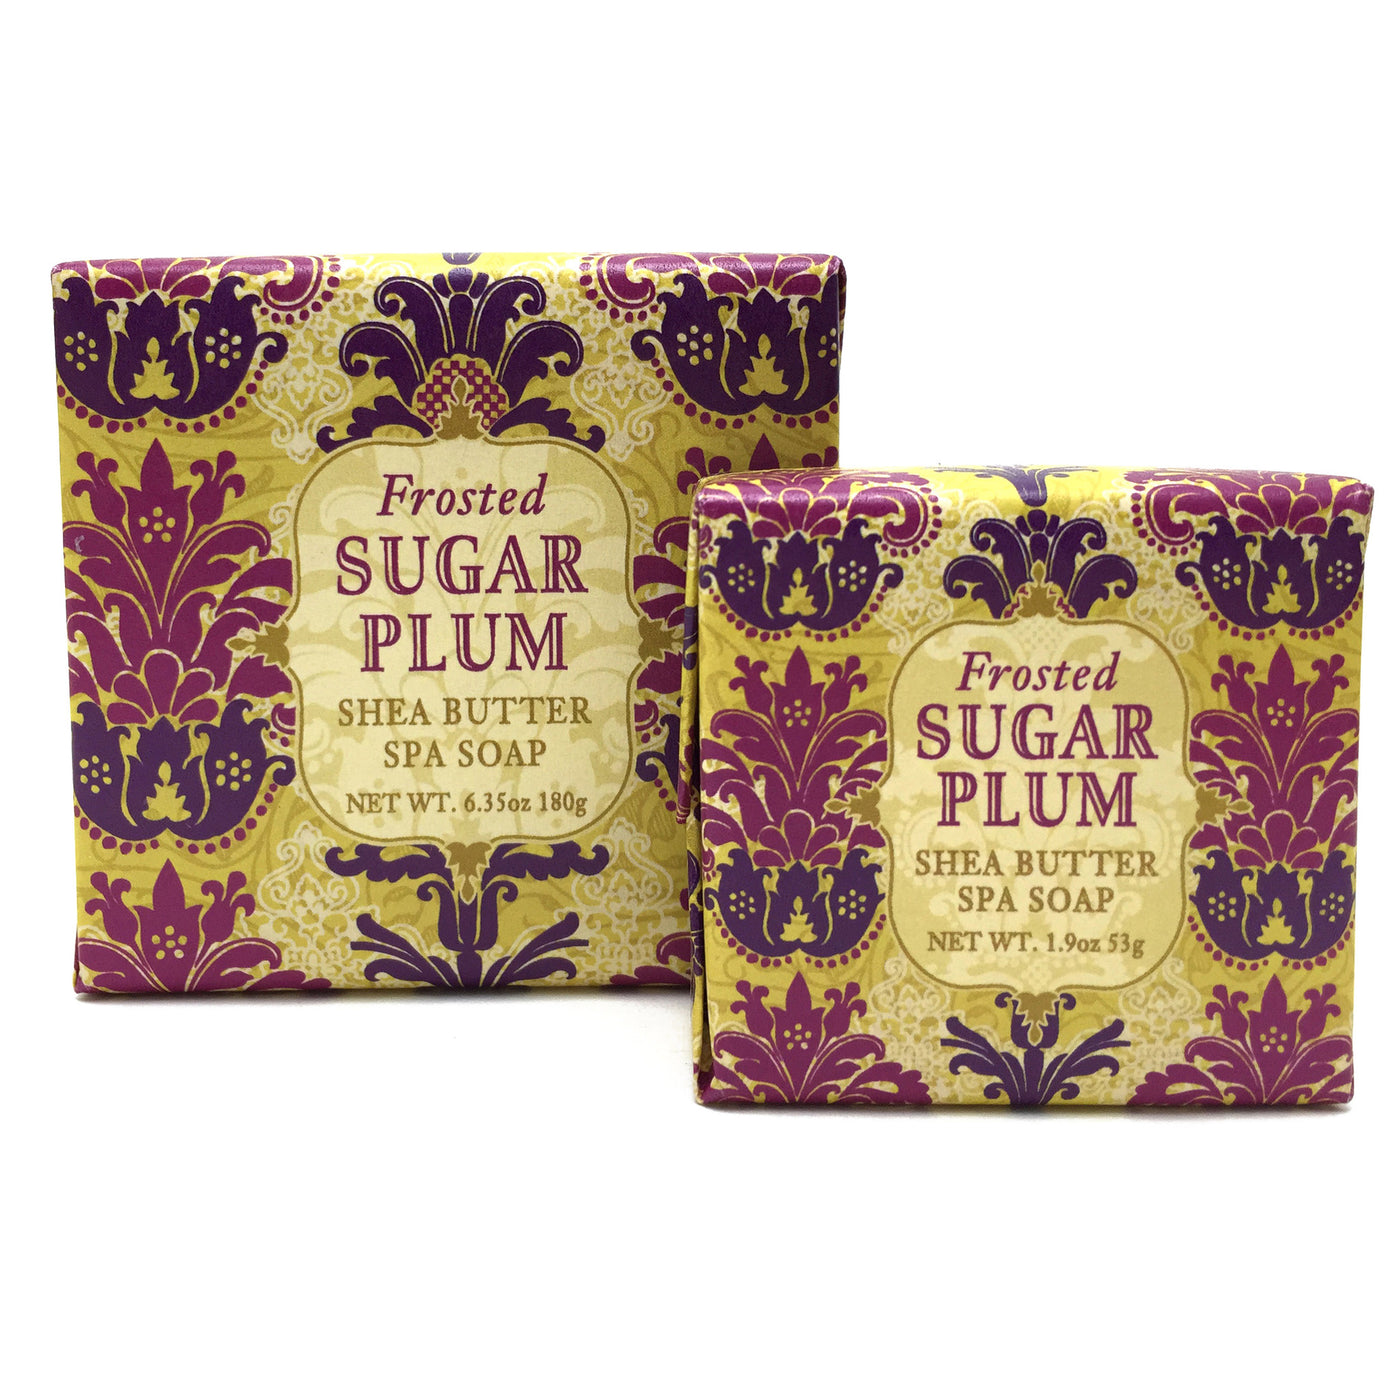 Frosted Sugar Plum Soap Bar